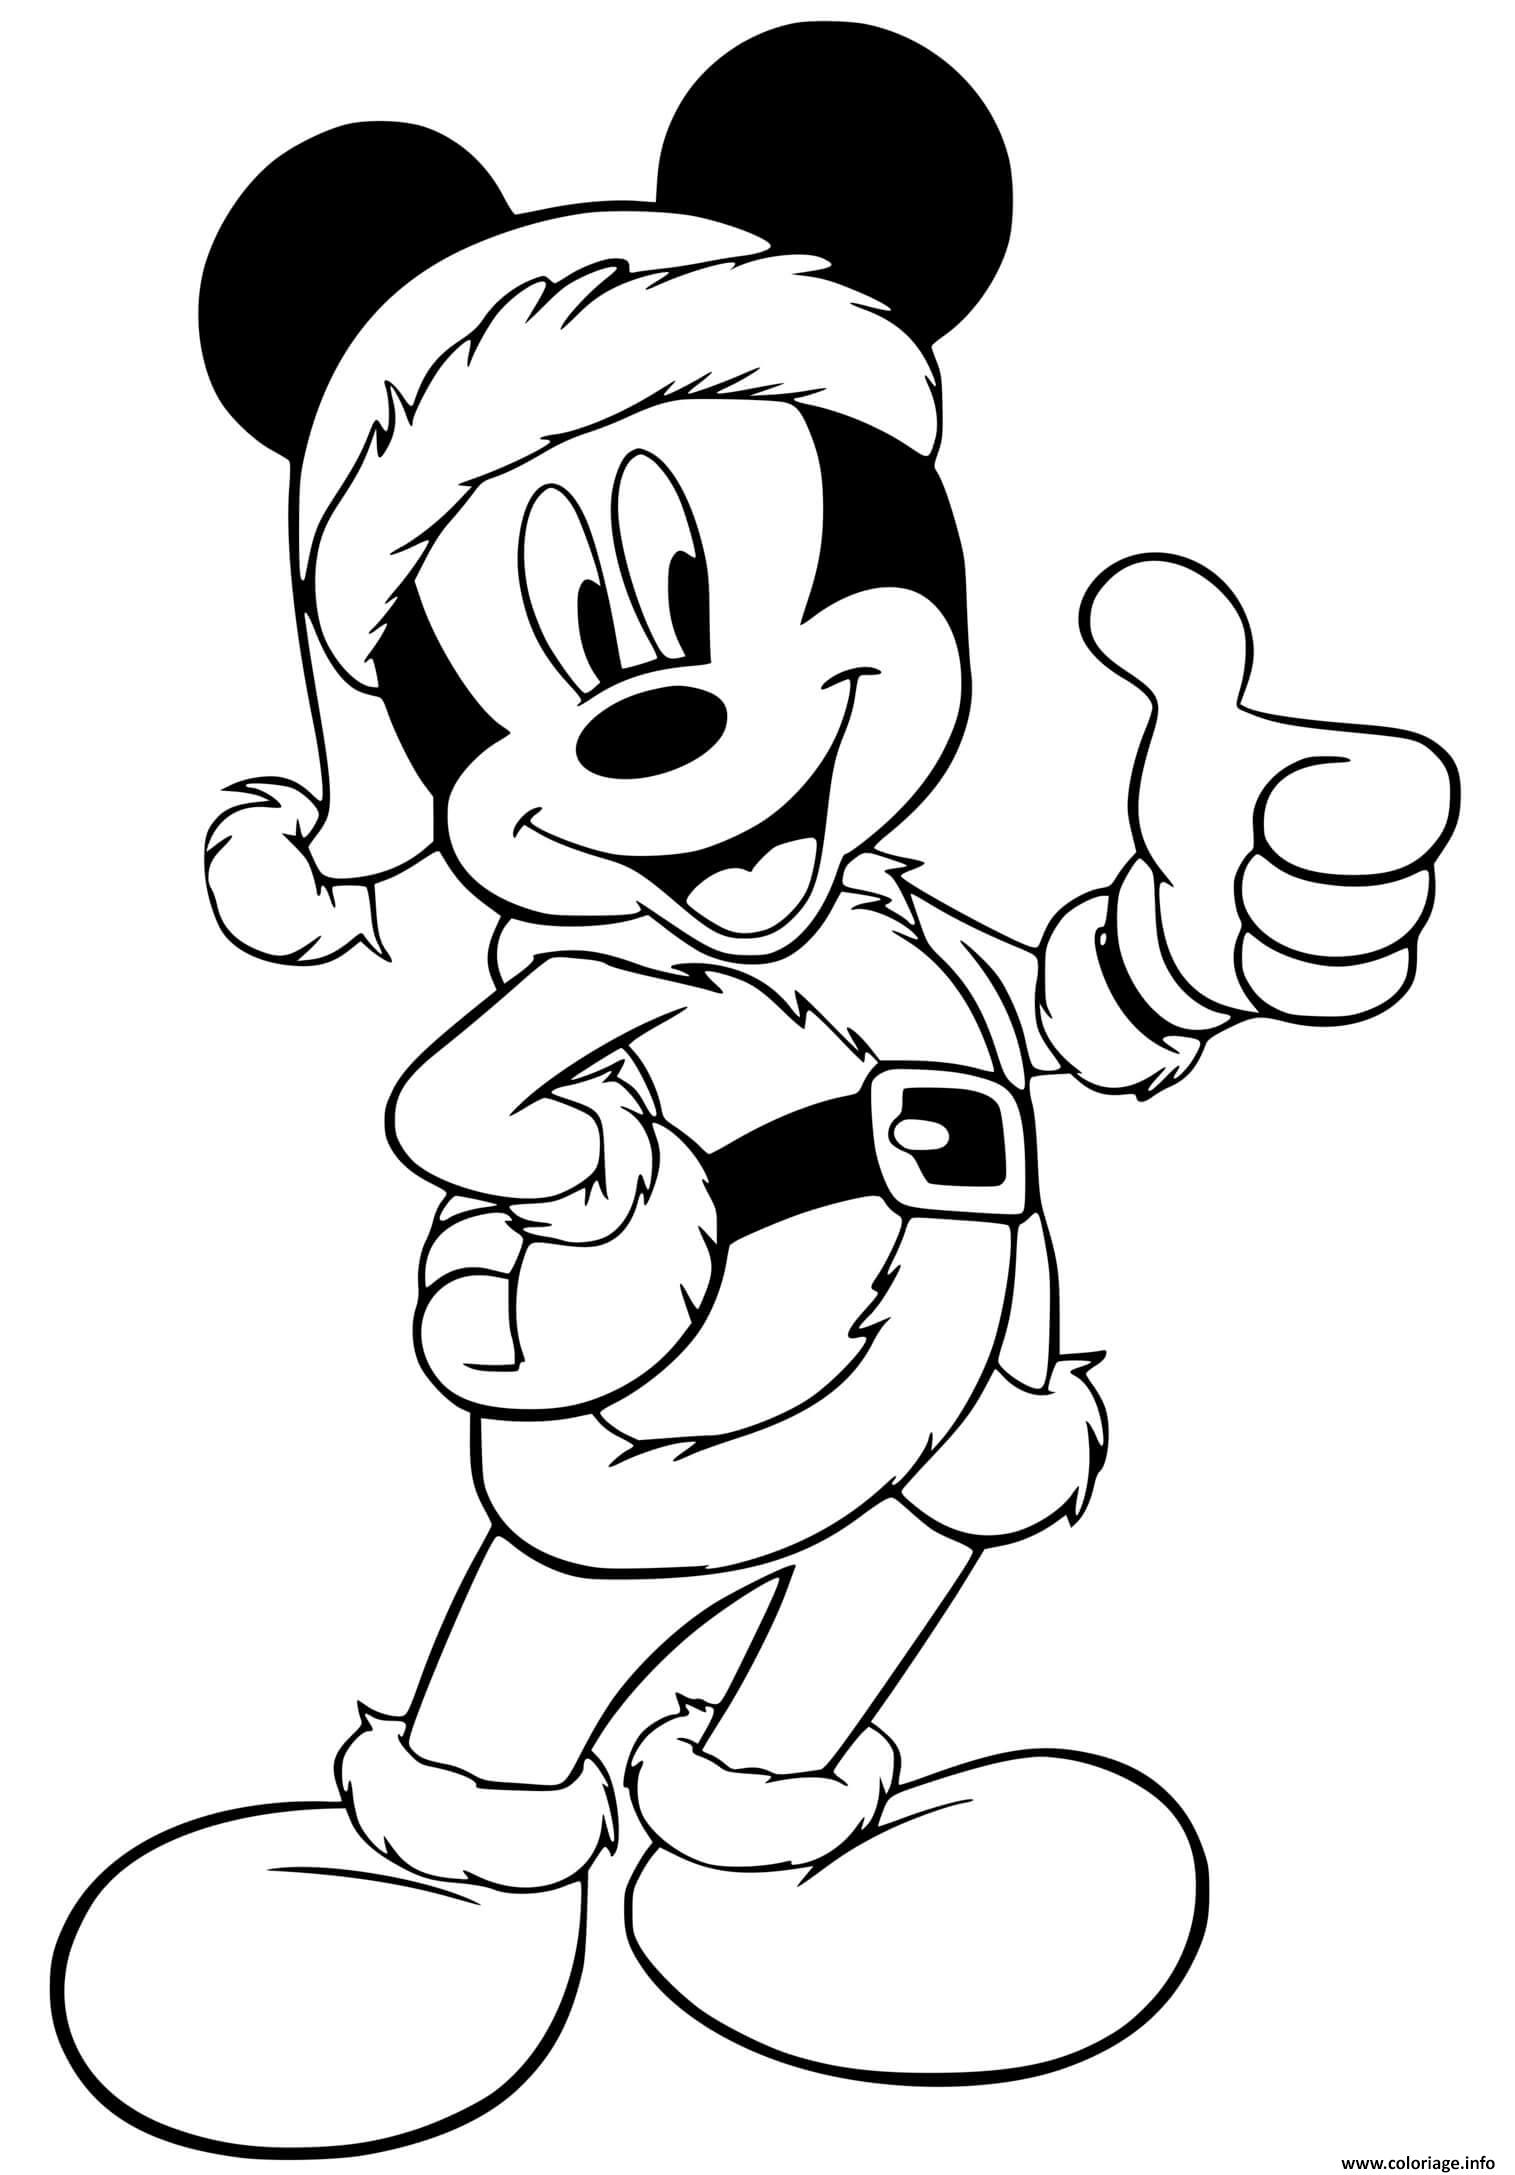 Dessin Mickey giving thumbs up Coloriage Gratuit à Imprimer